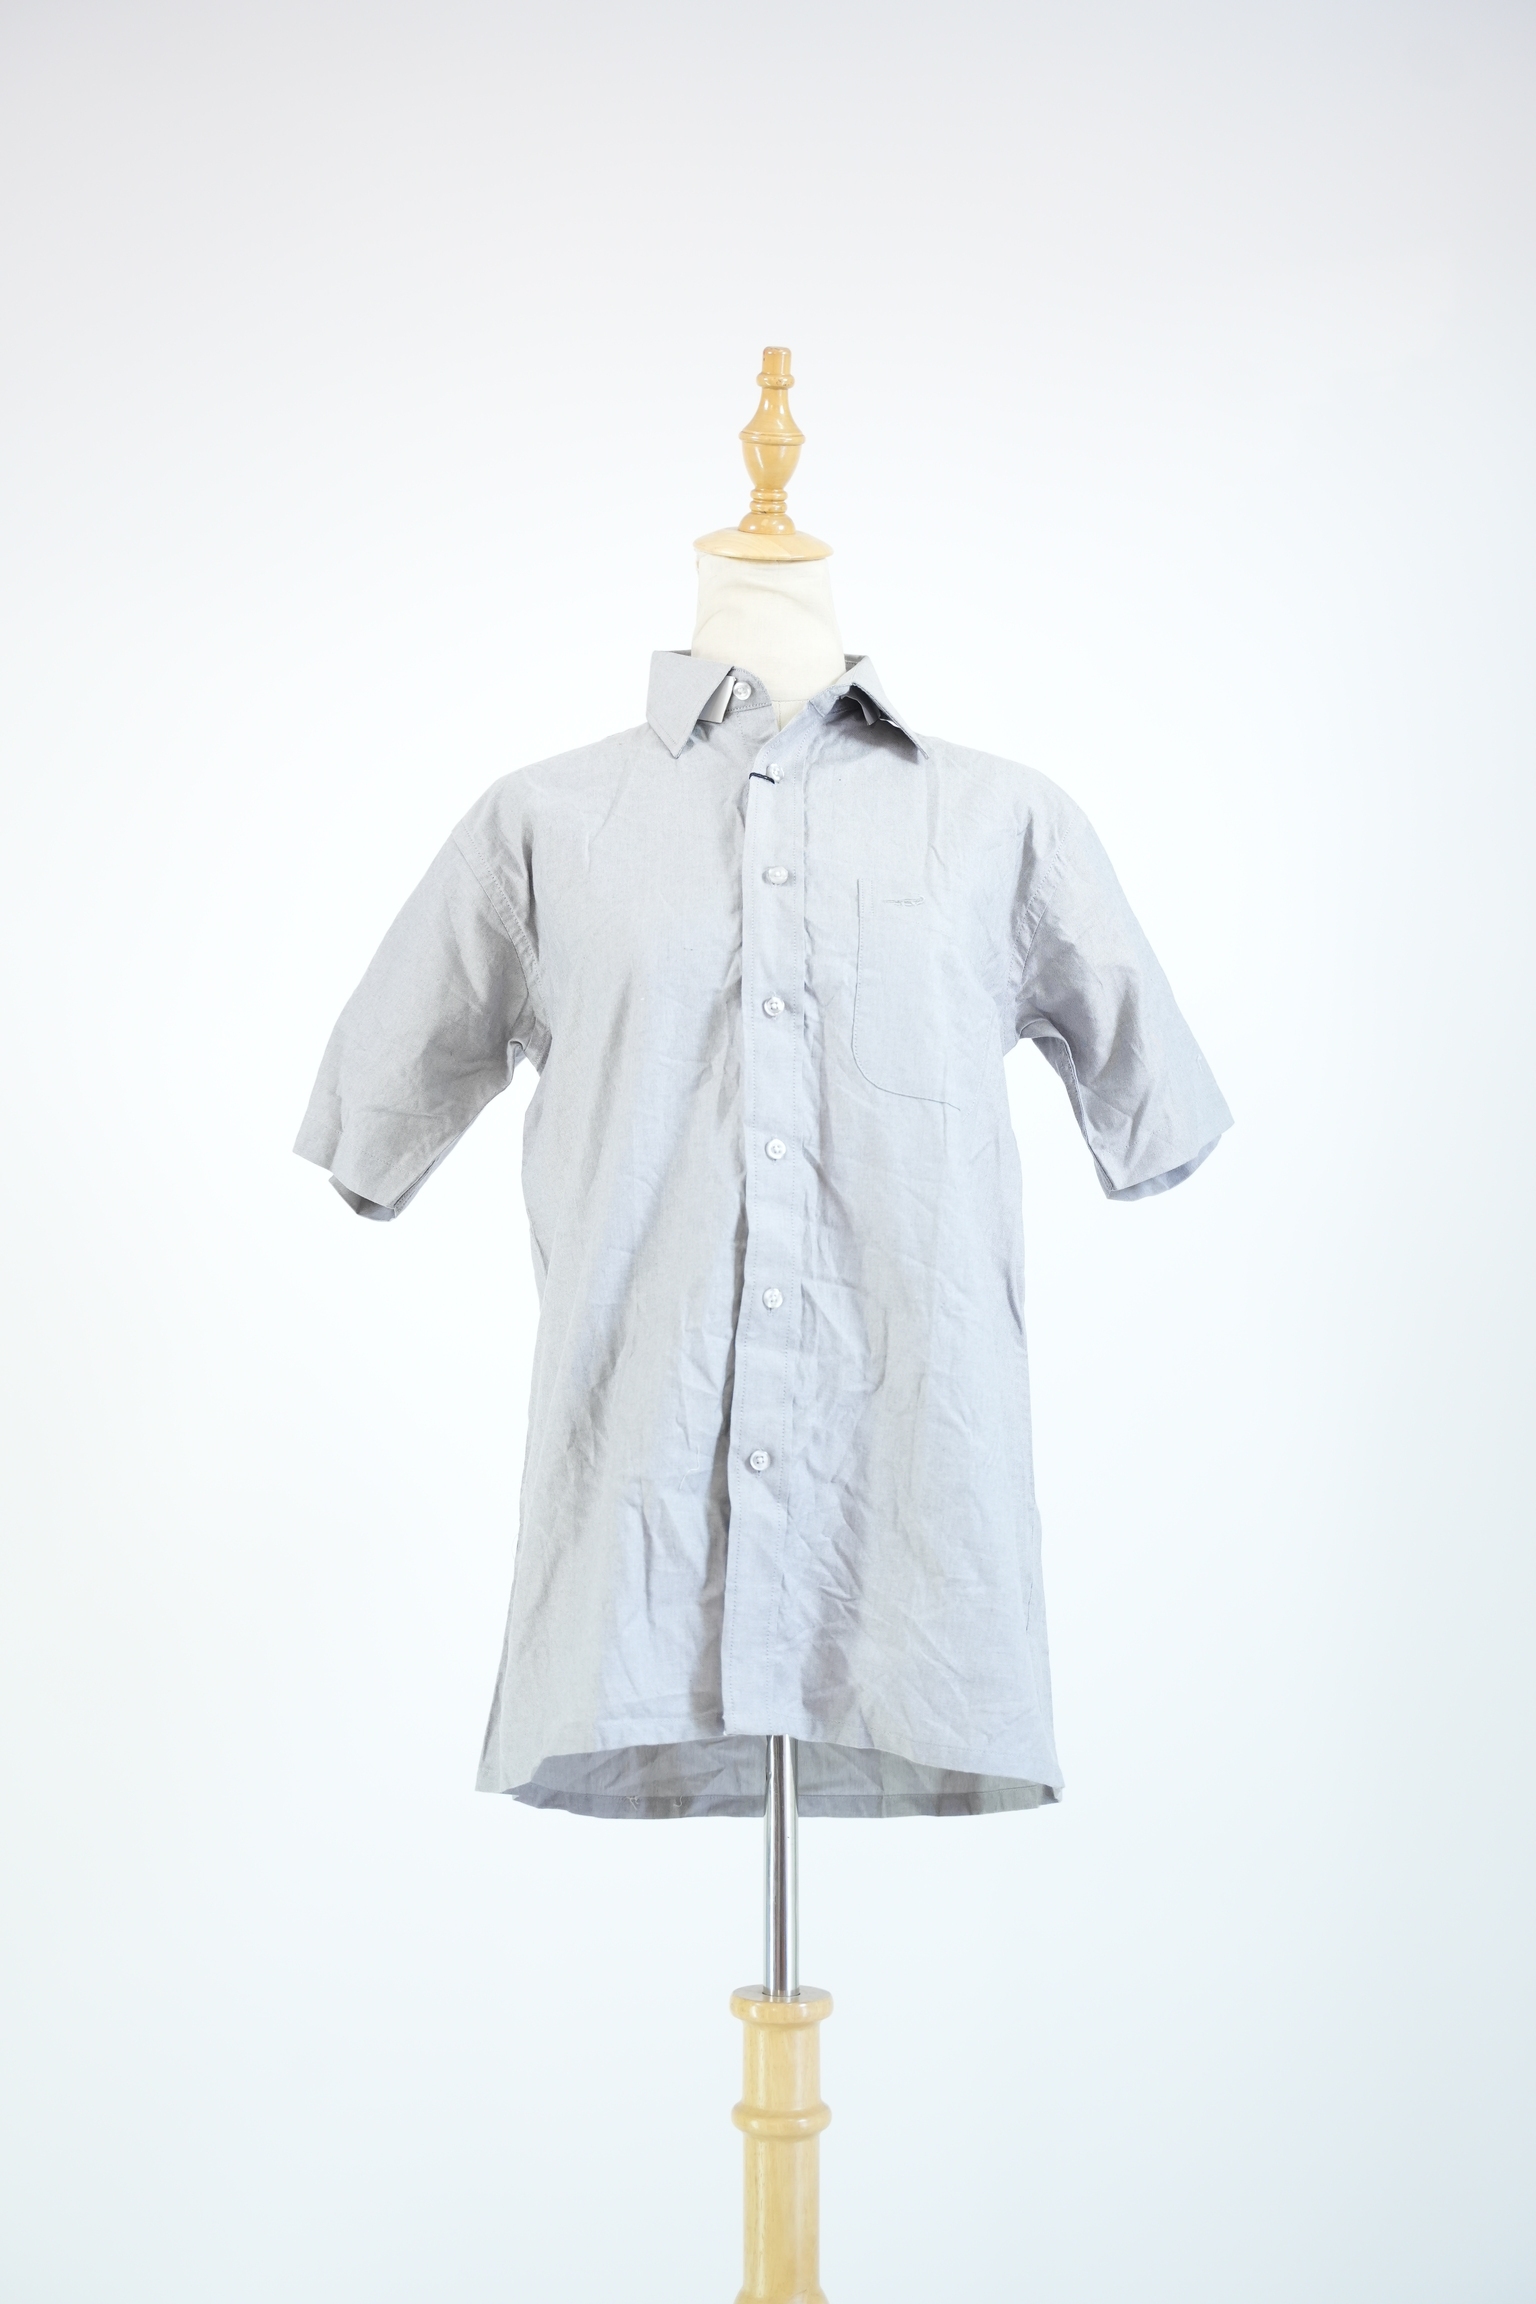 Grey Shirt from Crocodile(For Men)